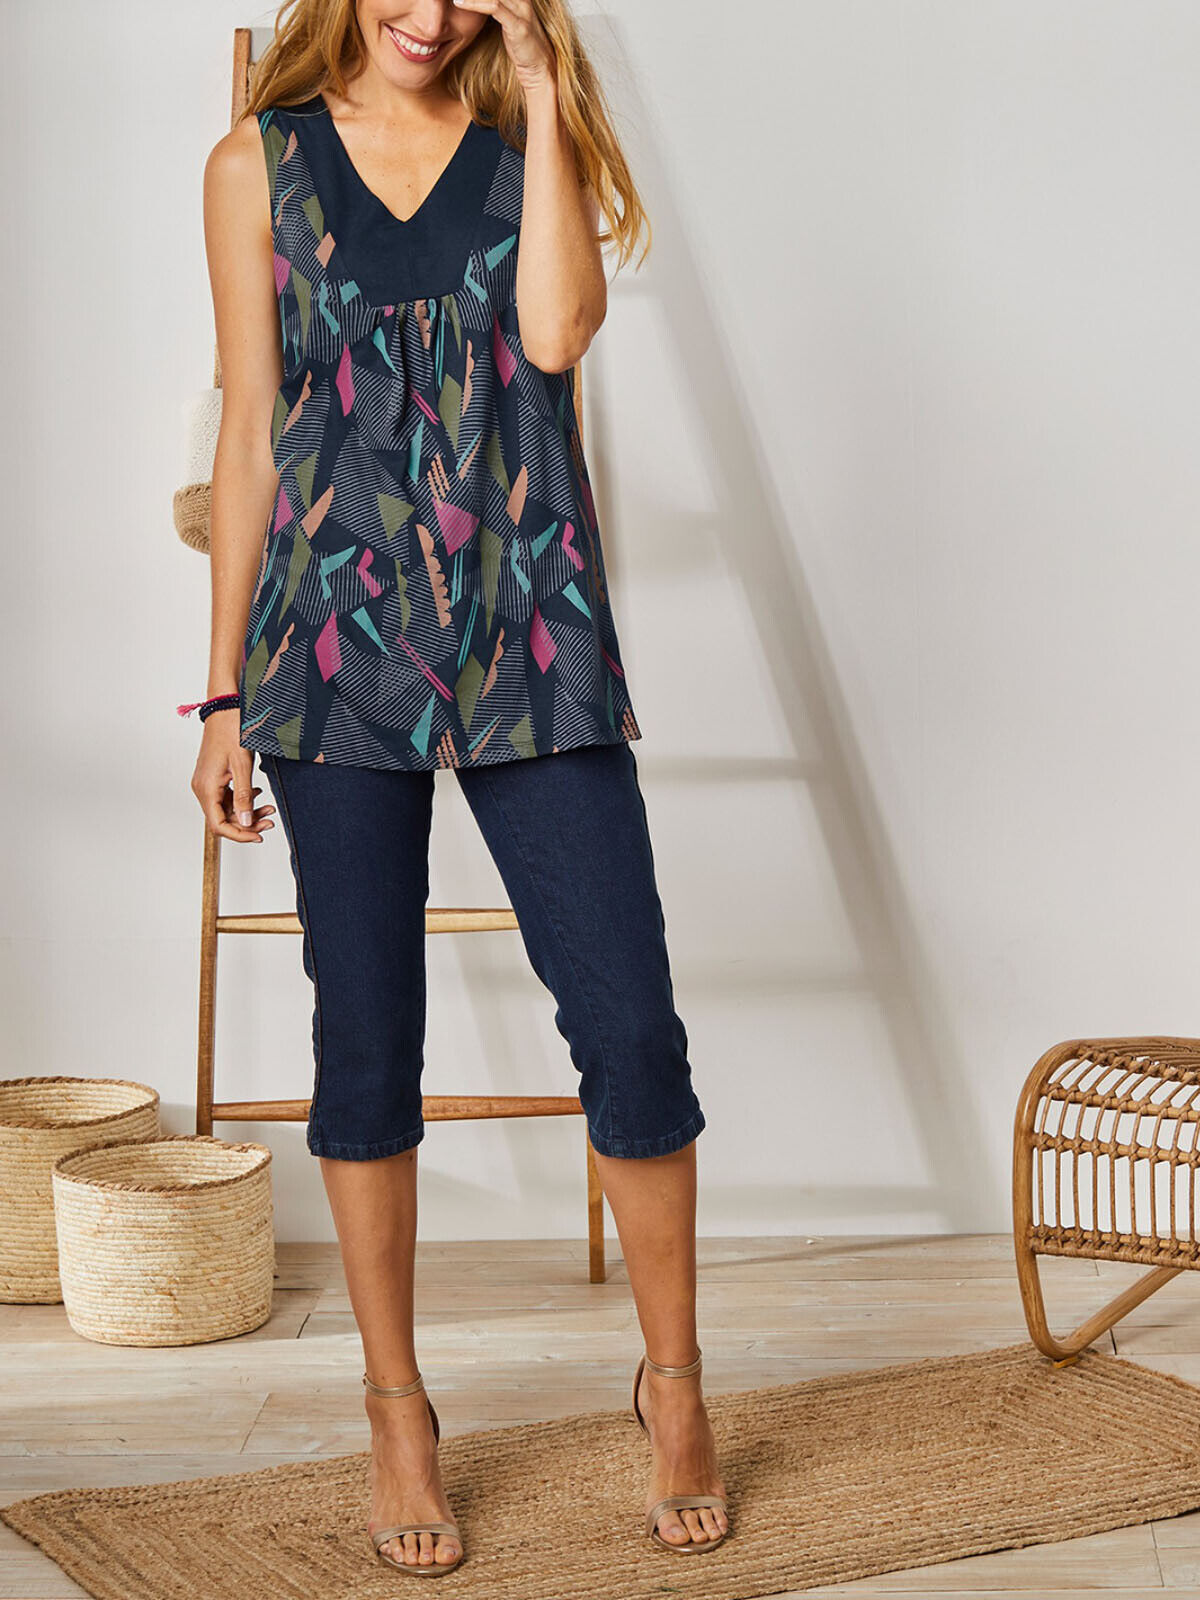 Blancheporte Navy Abstract Print Sleeveless Top in Sizes 14/16, 18/20, 22, 24